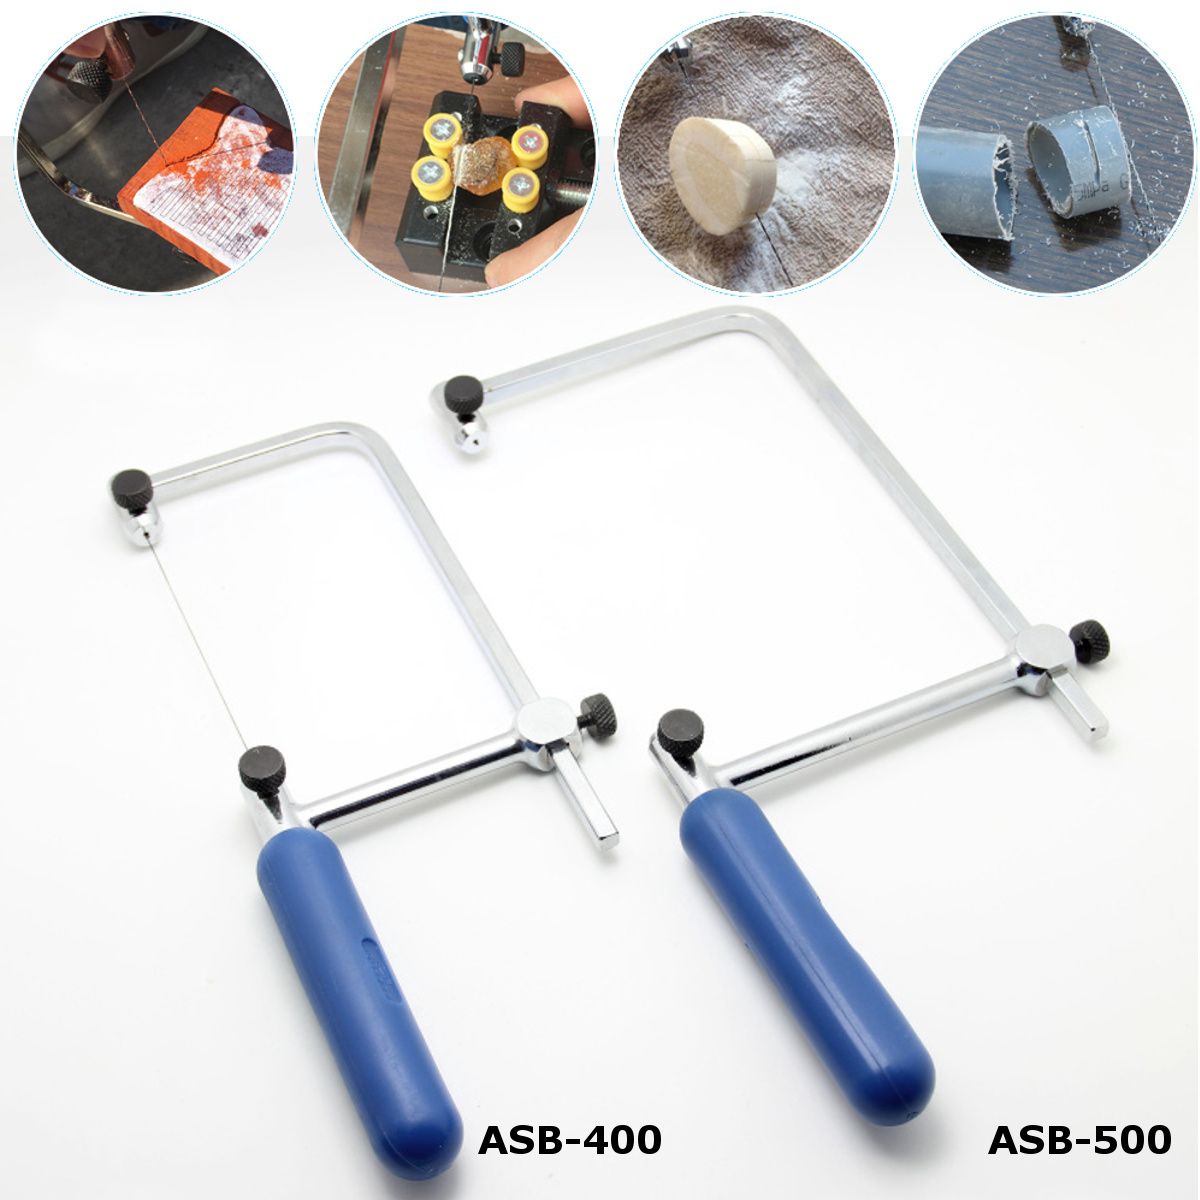 75mm105mm-Coping-Saw-Diamond-Wire-Cutter-Saw-Frame-Jade-Metal-Wire-Saw-Blade-Cutting-Tool-1306688